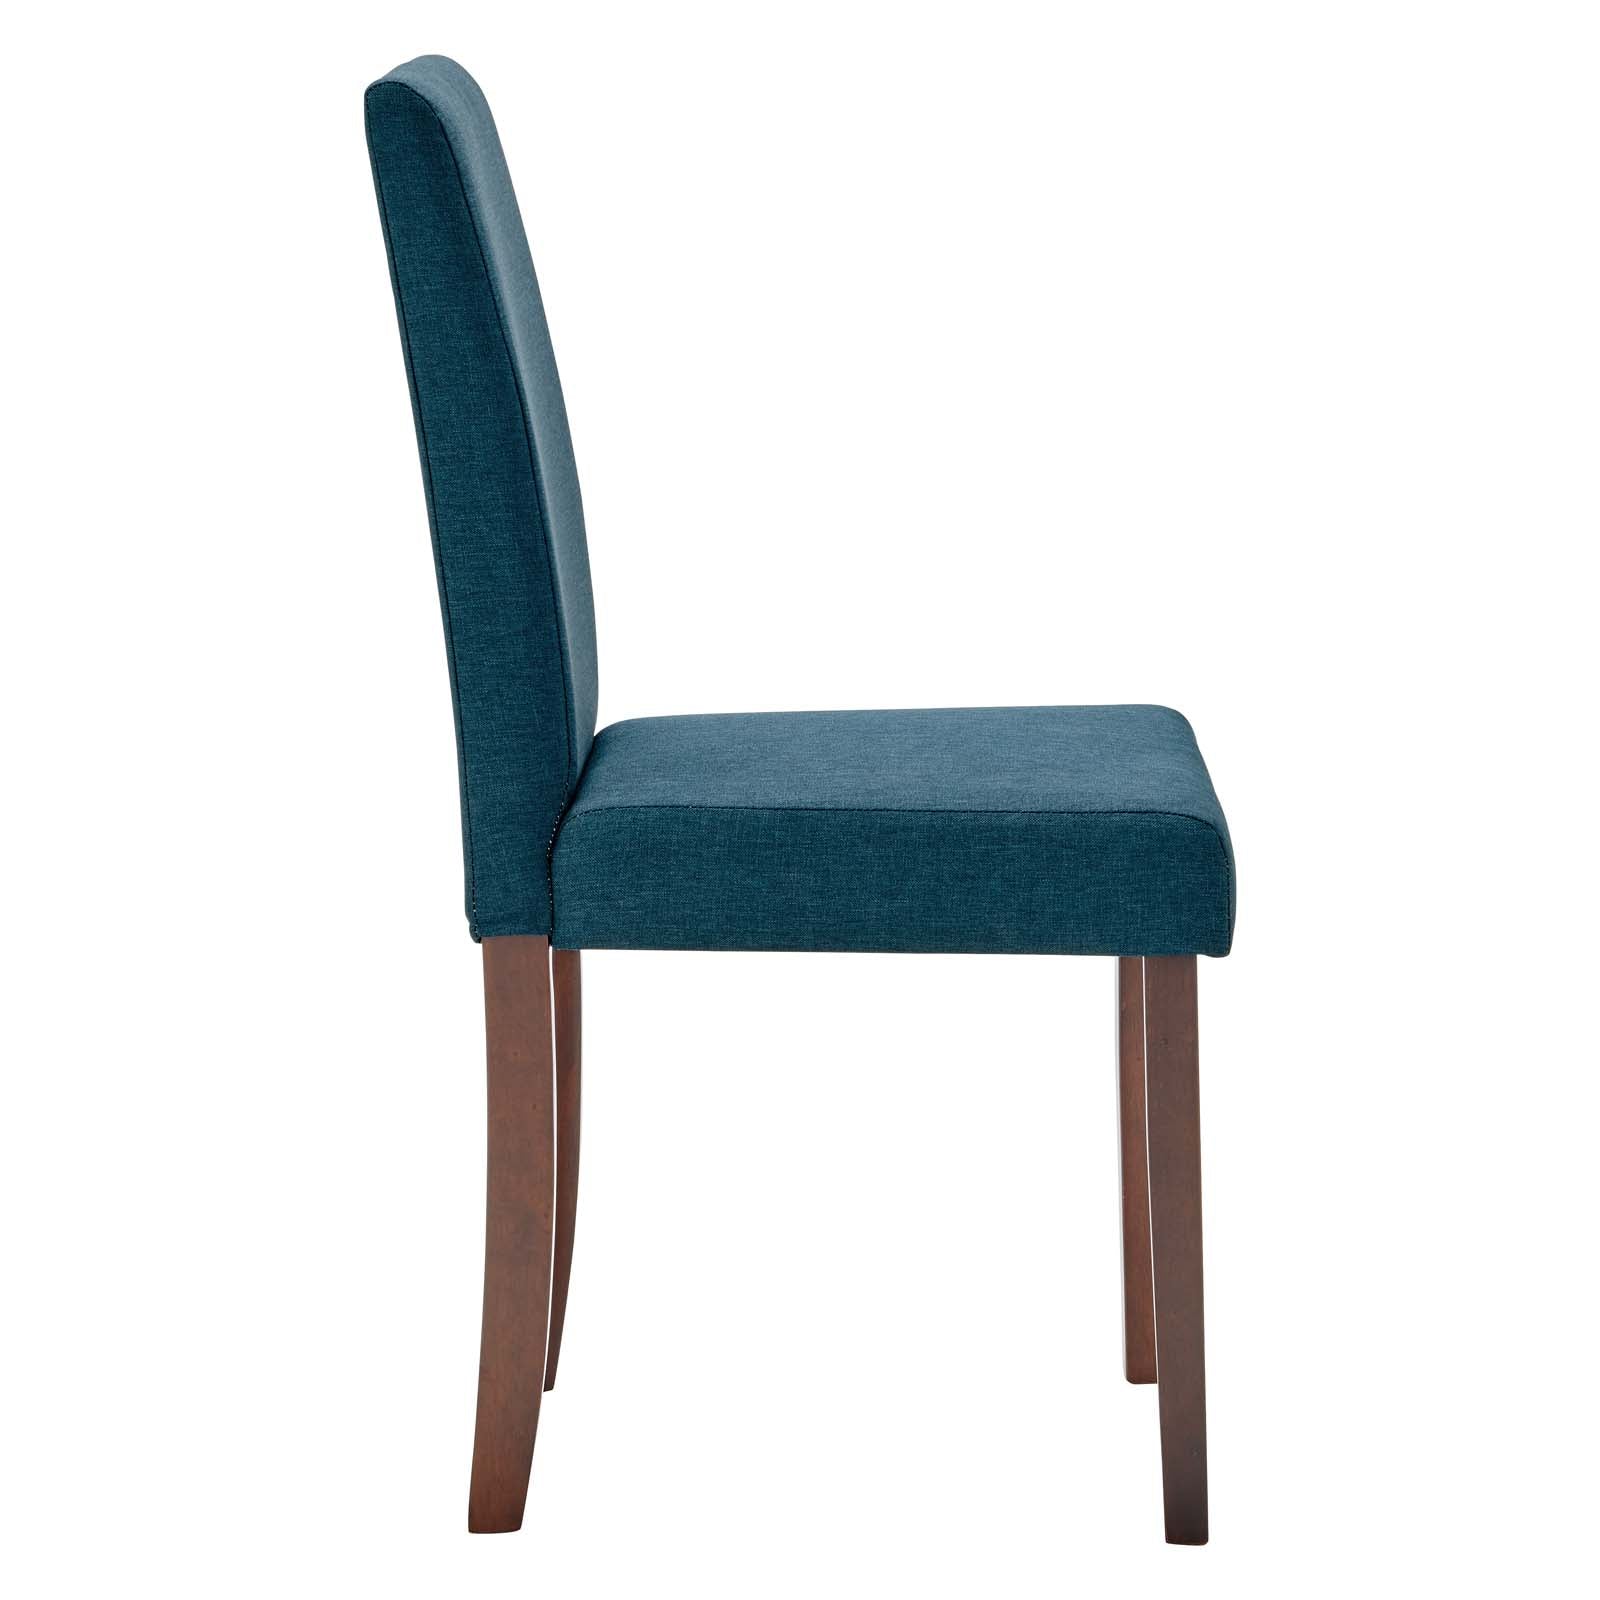 Modway Dining Chairs - Prosper Dining Side Chair Blue (Set of 2)